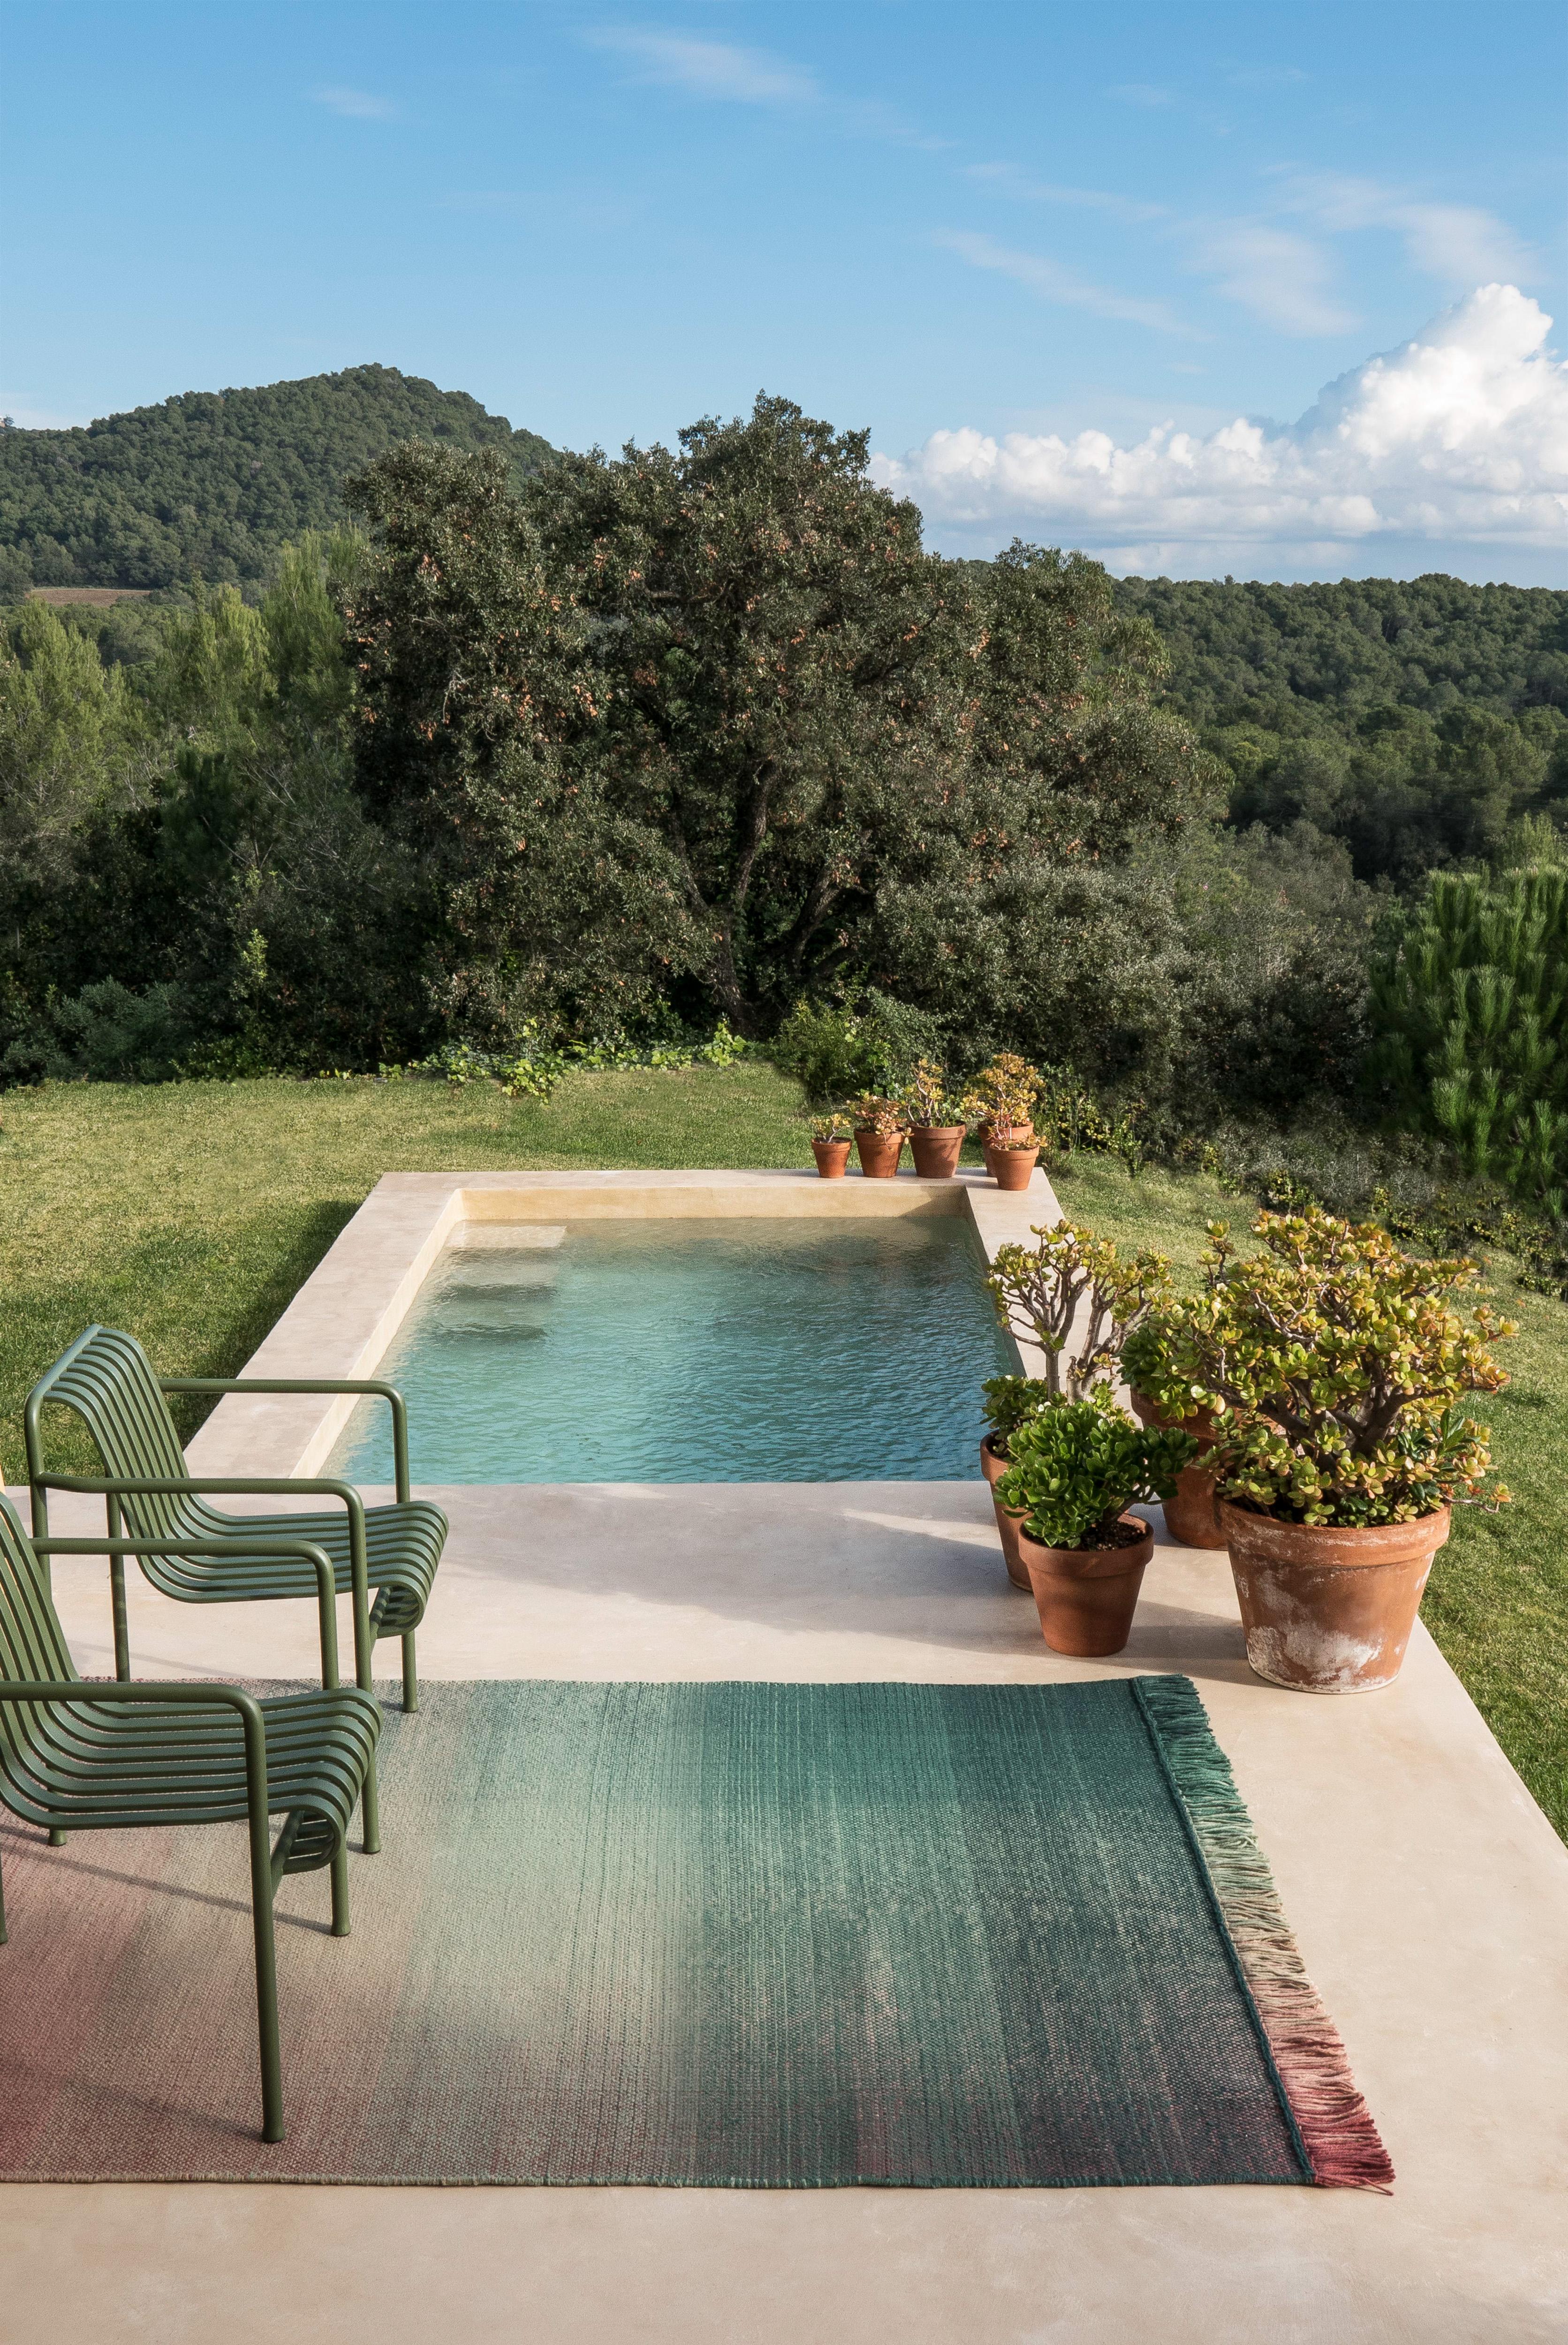 Within the new nanimarquina outdoor concept, some of the brand’s most successful collections are represented such as shade. As in the original collection, this outdoor version keeps its exquisite simplicity reflecting a complex technical process to